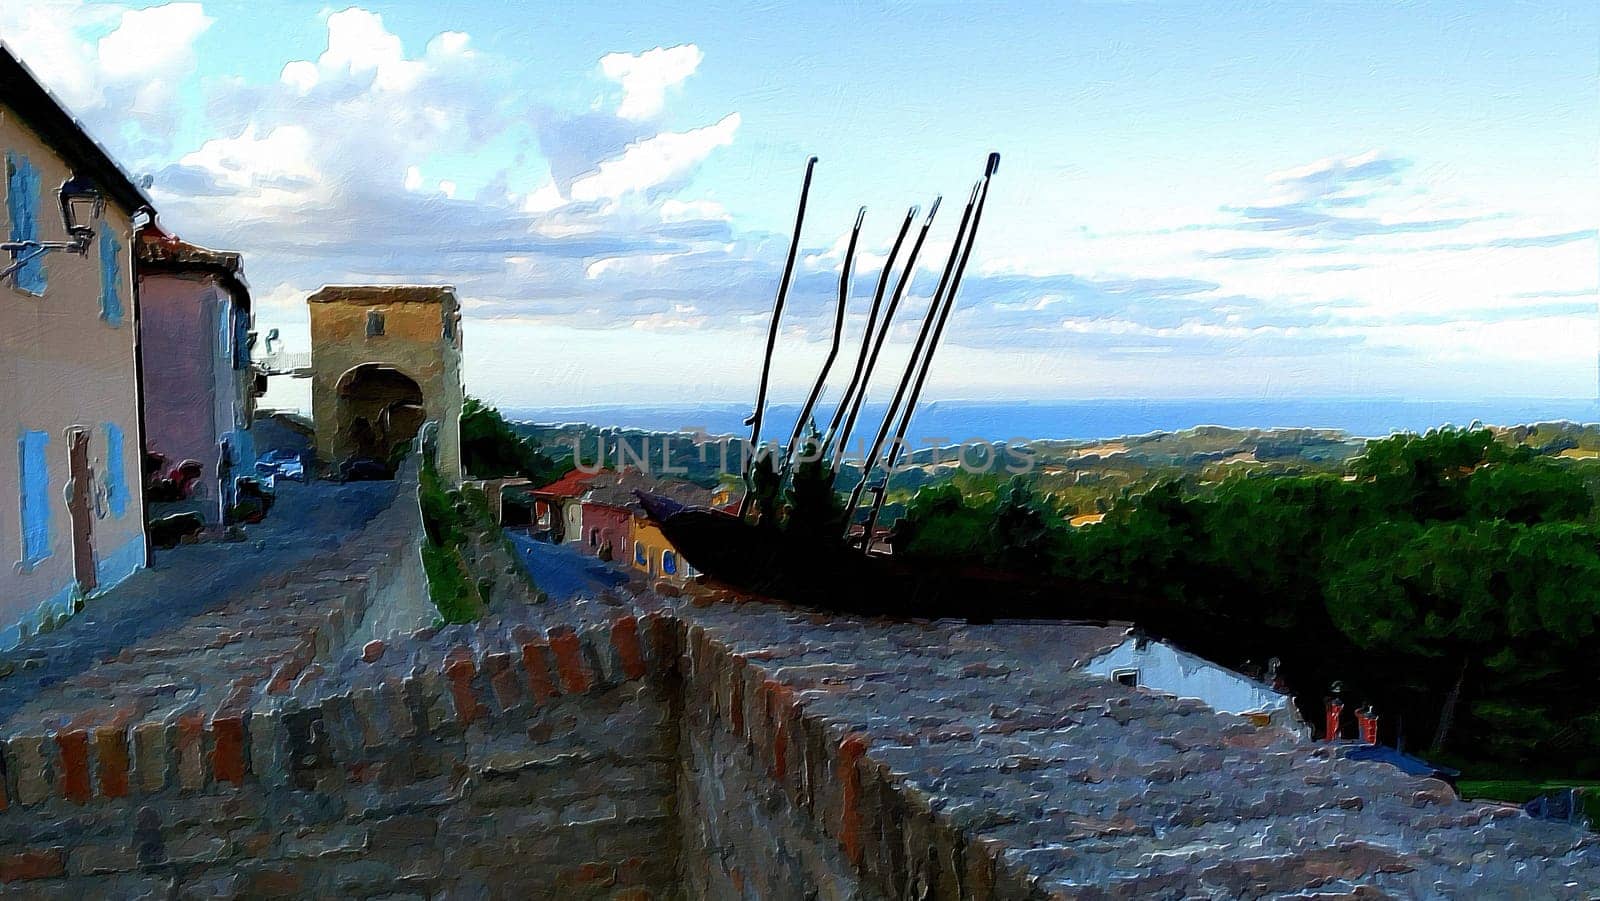 A view from the walls of Novilara, a medieval village in Italy during a summer evening.